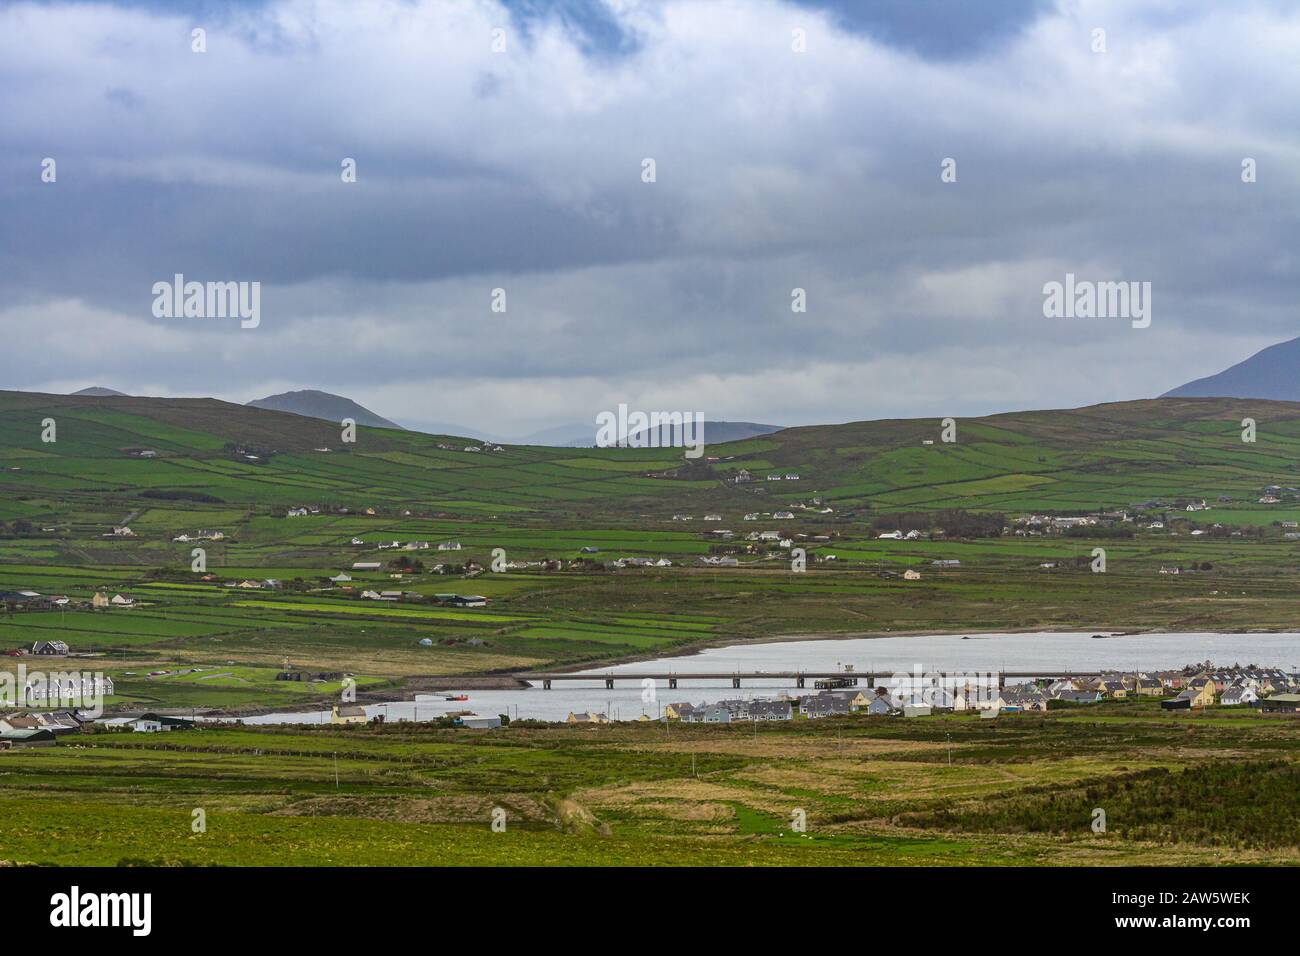 View to Portmagee, Iveragh peninsula, with bridge over Portmagee Channel to Valentia Island (in the background), County Kerry, Ireland, Europe Stock Photo